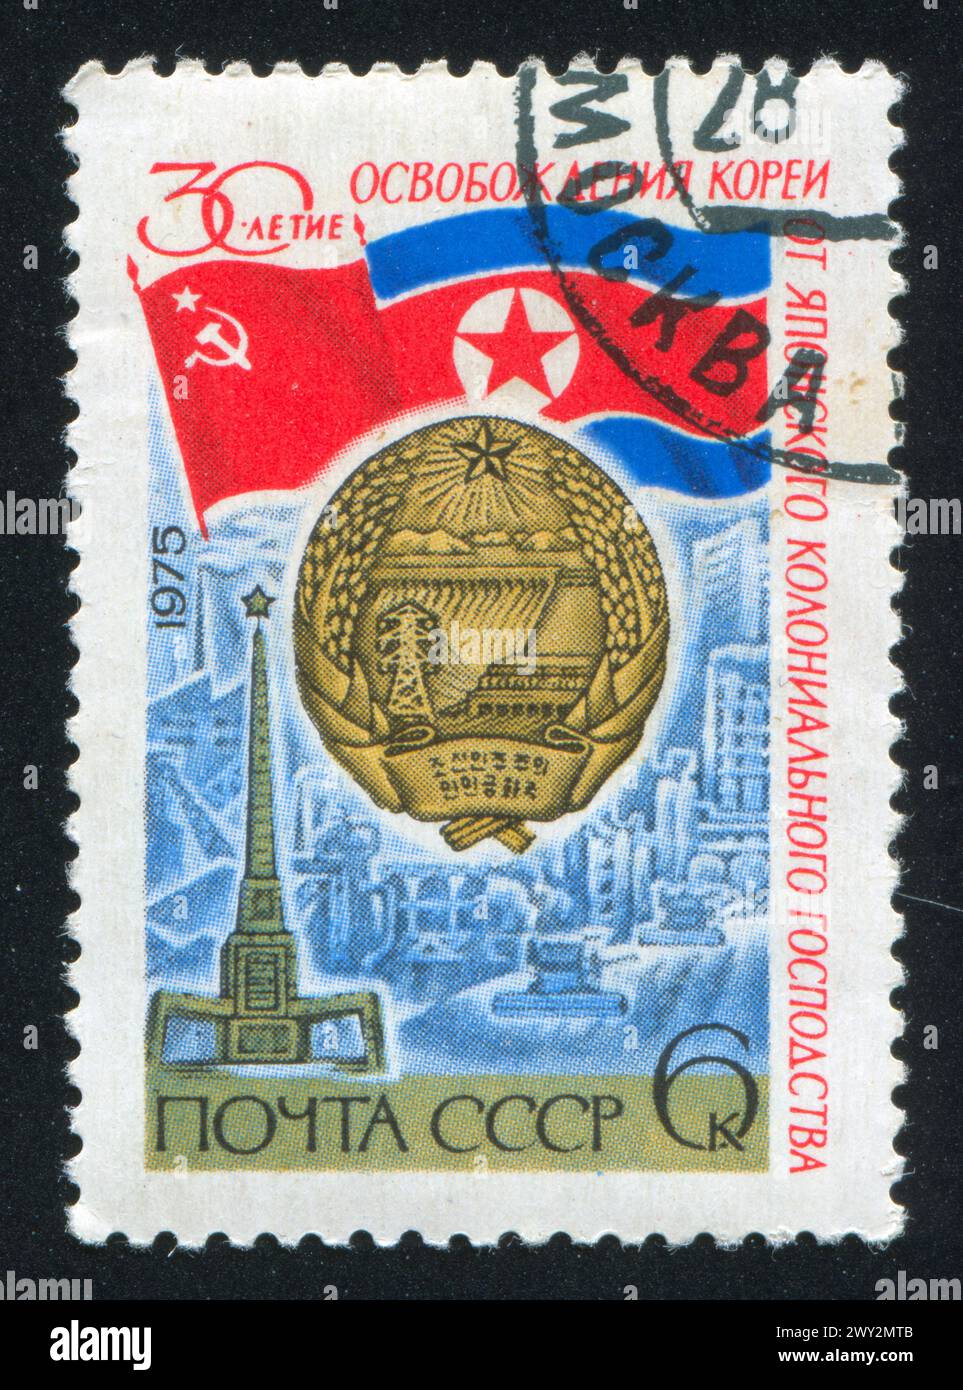 RUSSIA - CIRCA 1975: stamp printed by Russia, shows Flags of USSR, North Korea, arms of N. K., Liberation monument, Pyongyang, circa 1975 Stock Photo